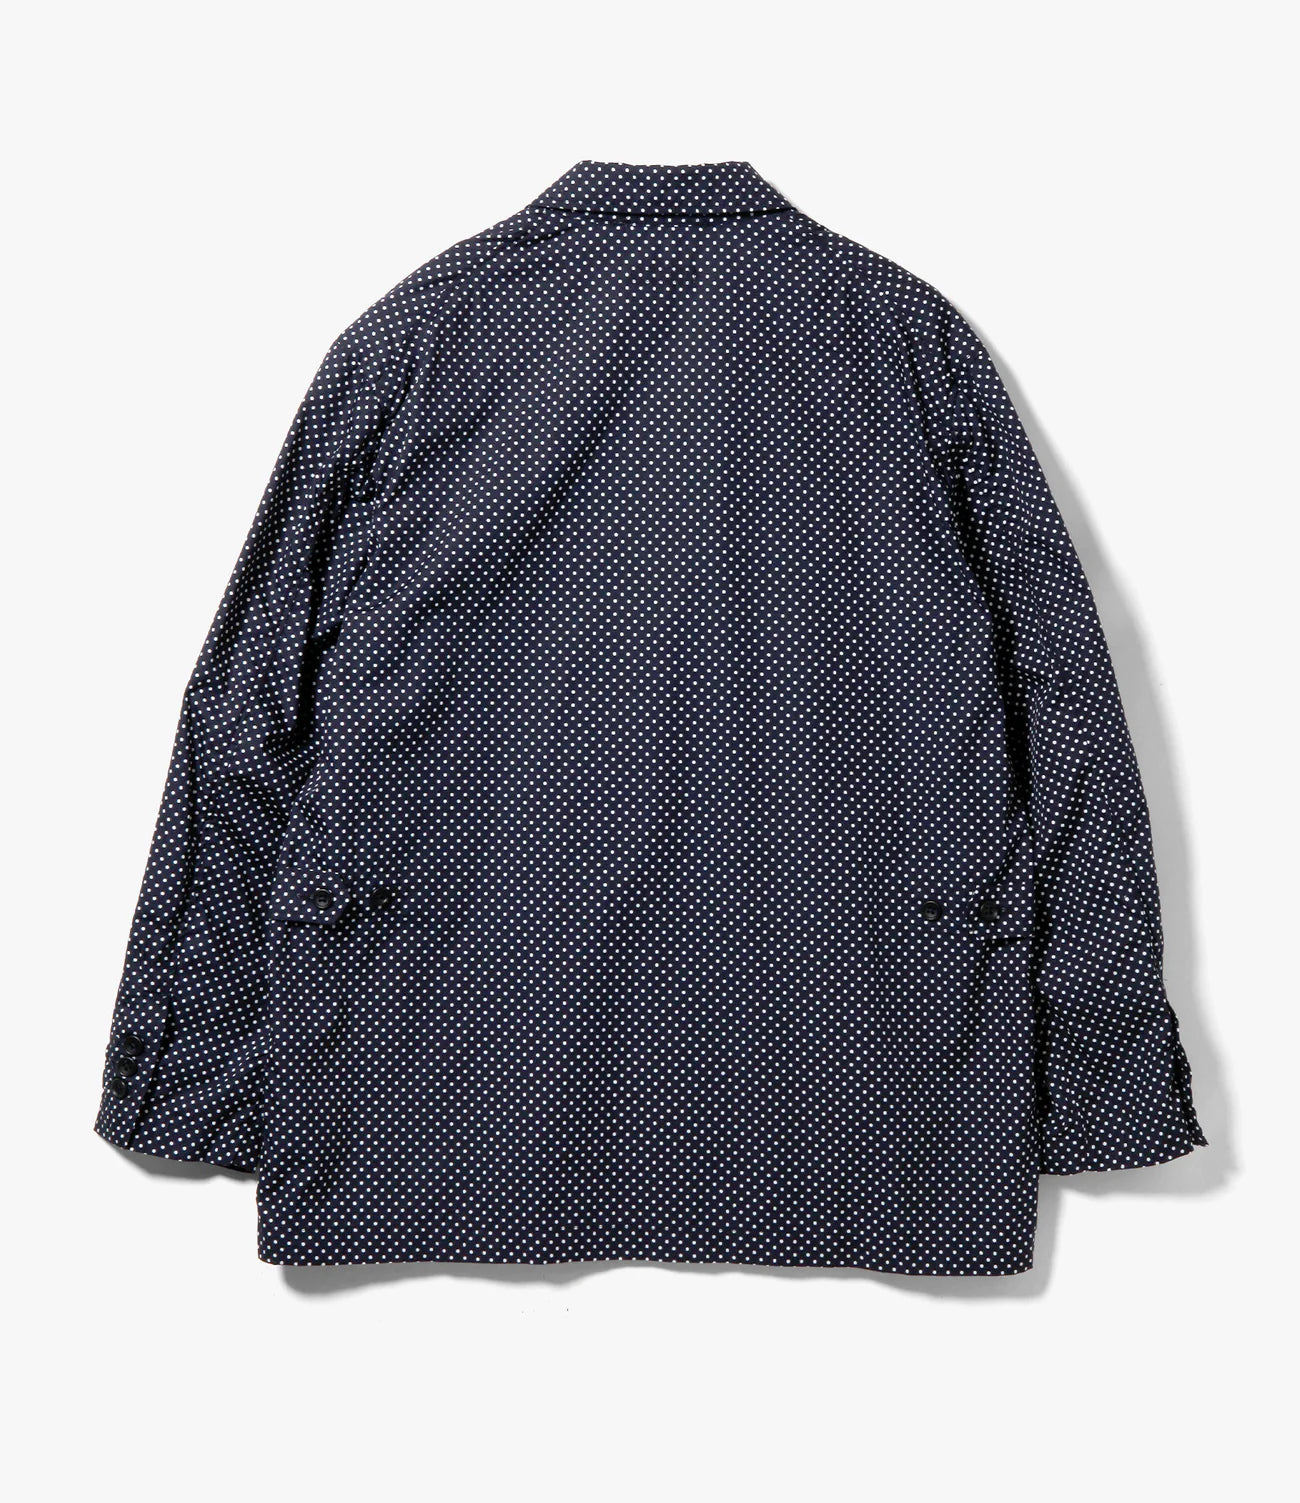 Engineered Garments Nepenthes SP Loiter Jacket - Navy Big PD Broadcloth